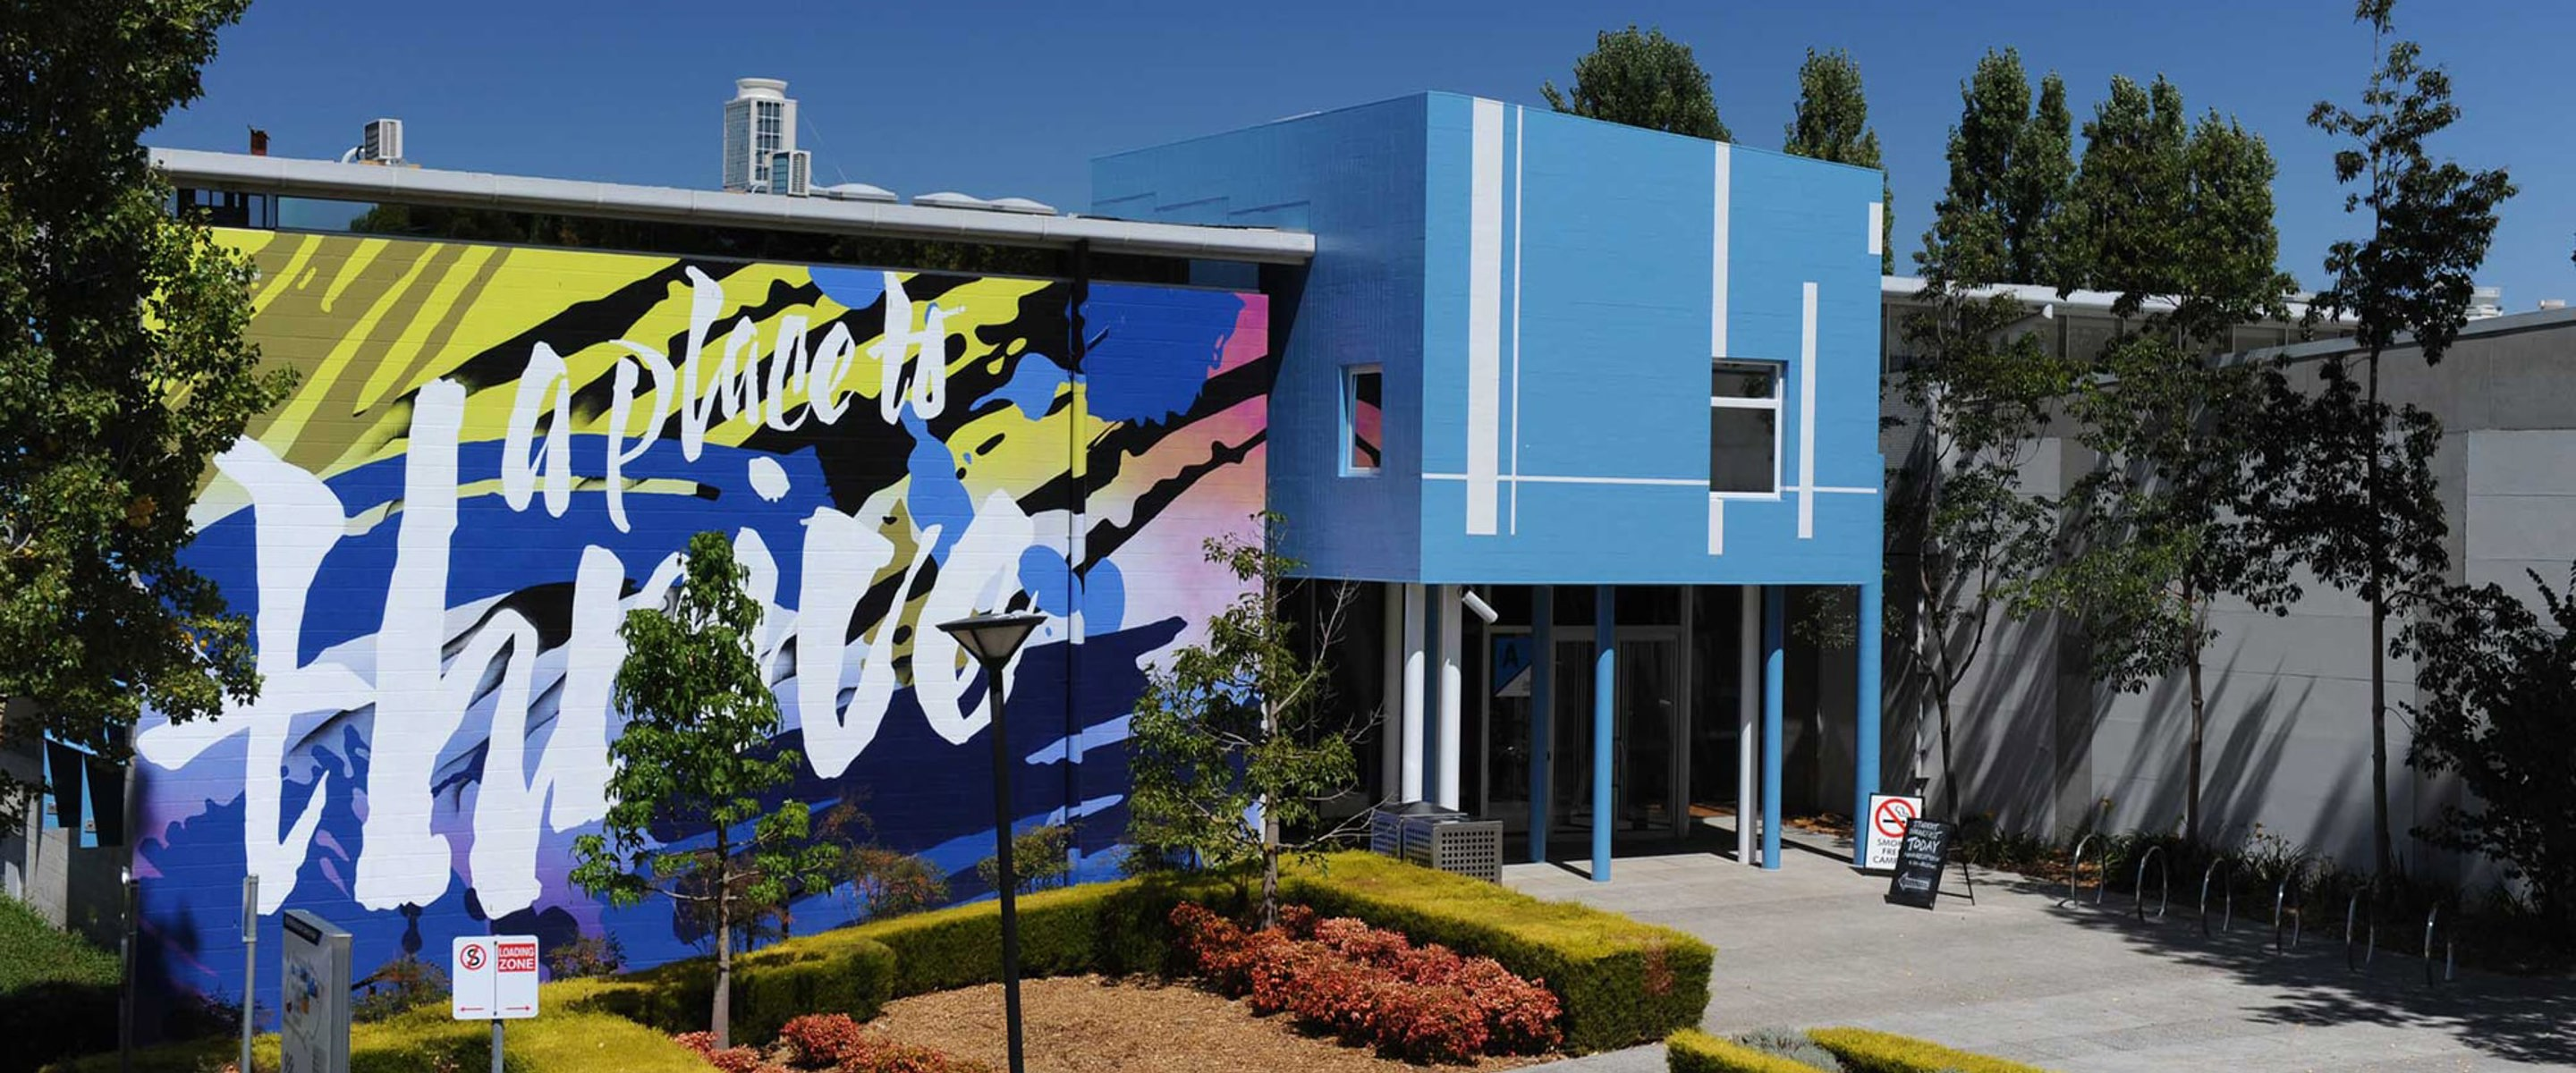 Facade of Greensborough campus. The entry is a blue building with a large mural that says "a place to thrive" on a blue, pink and yellow background